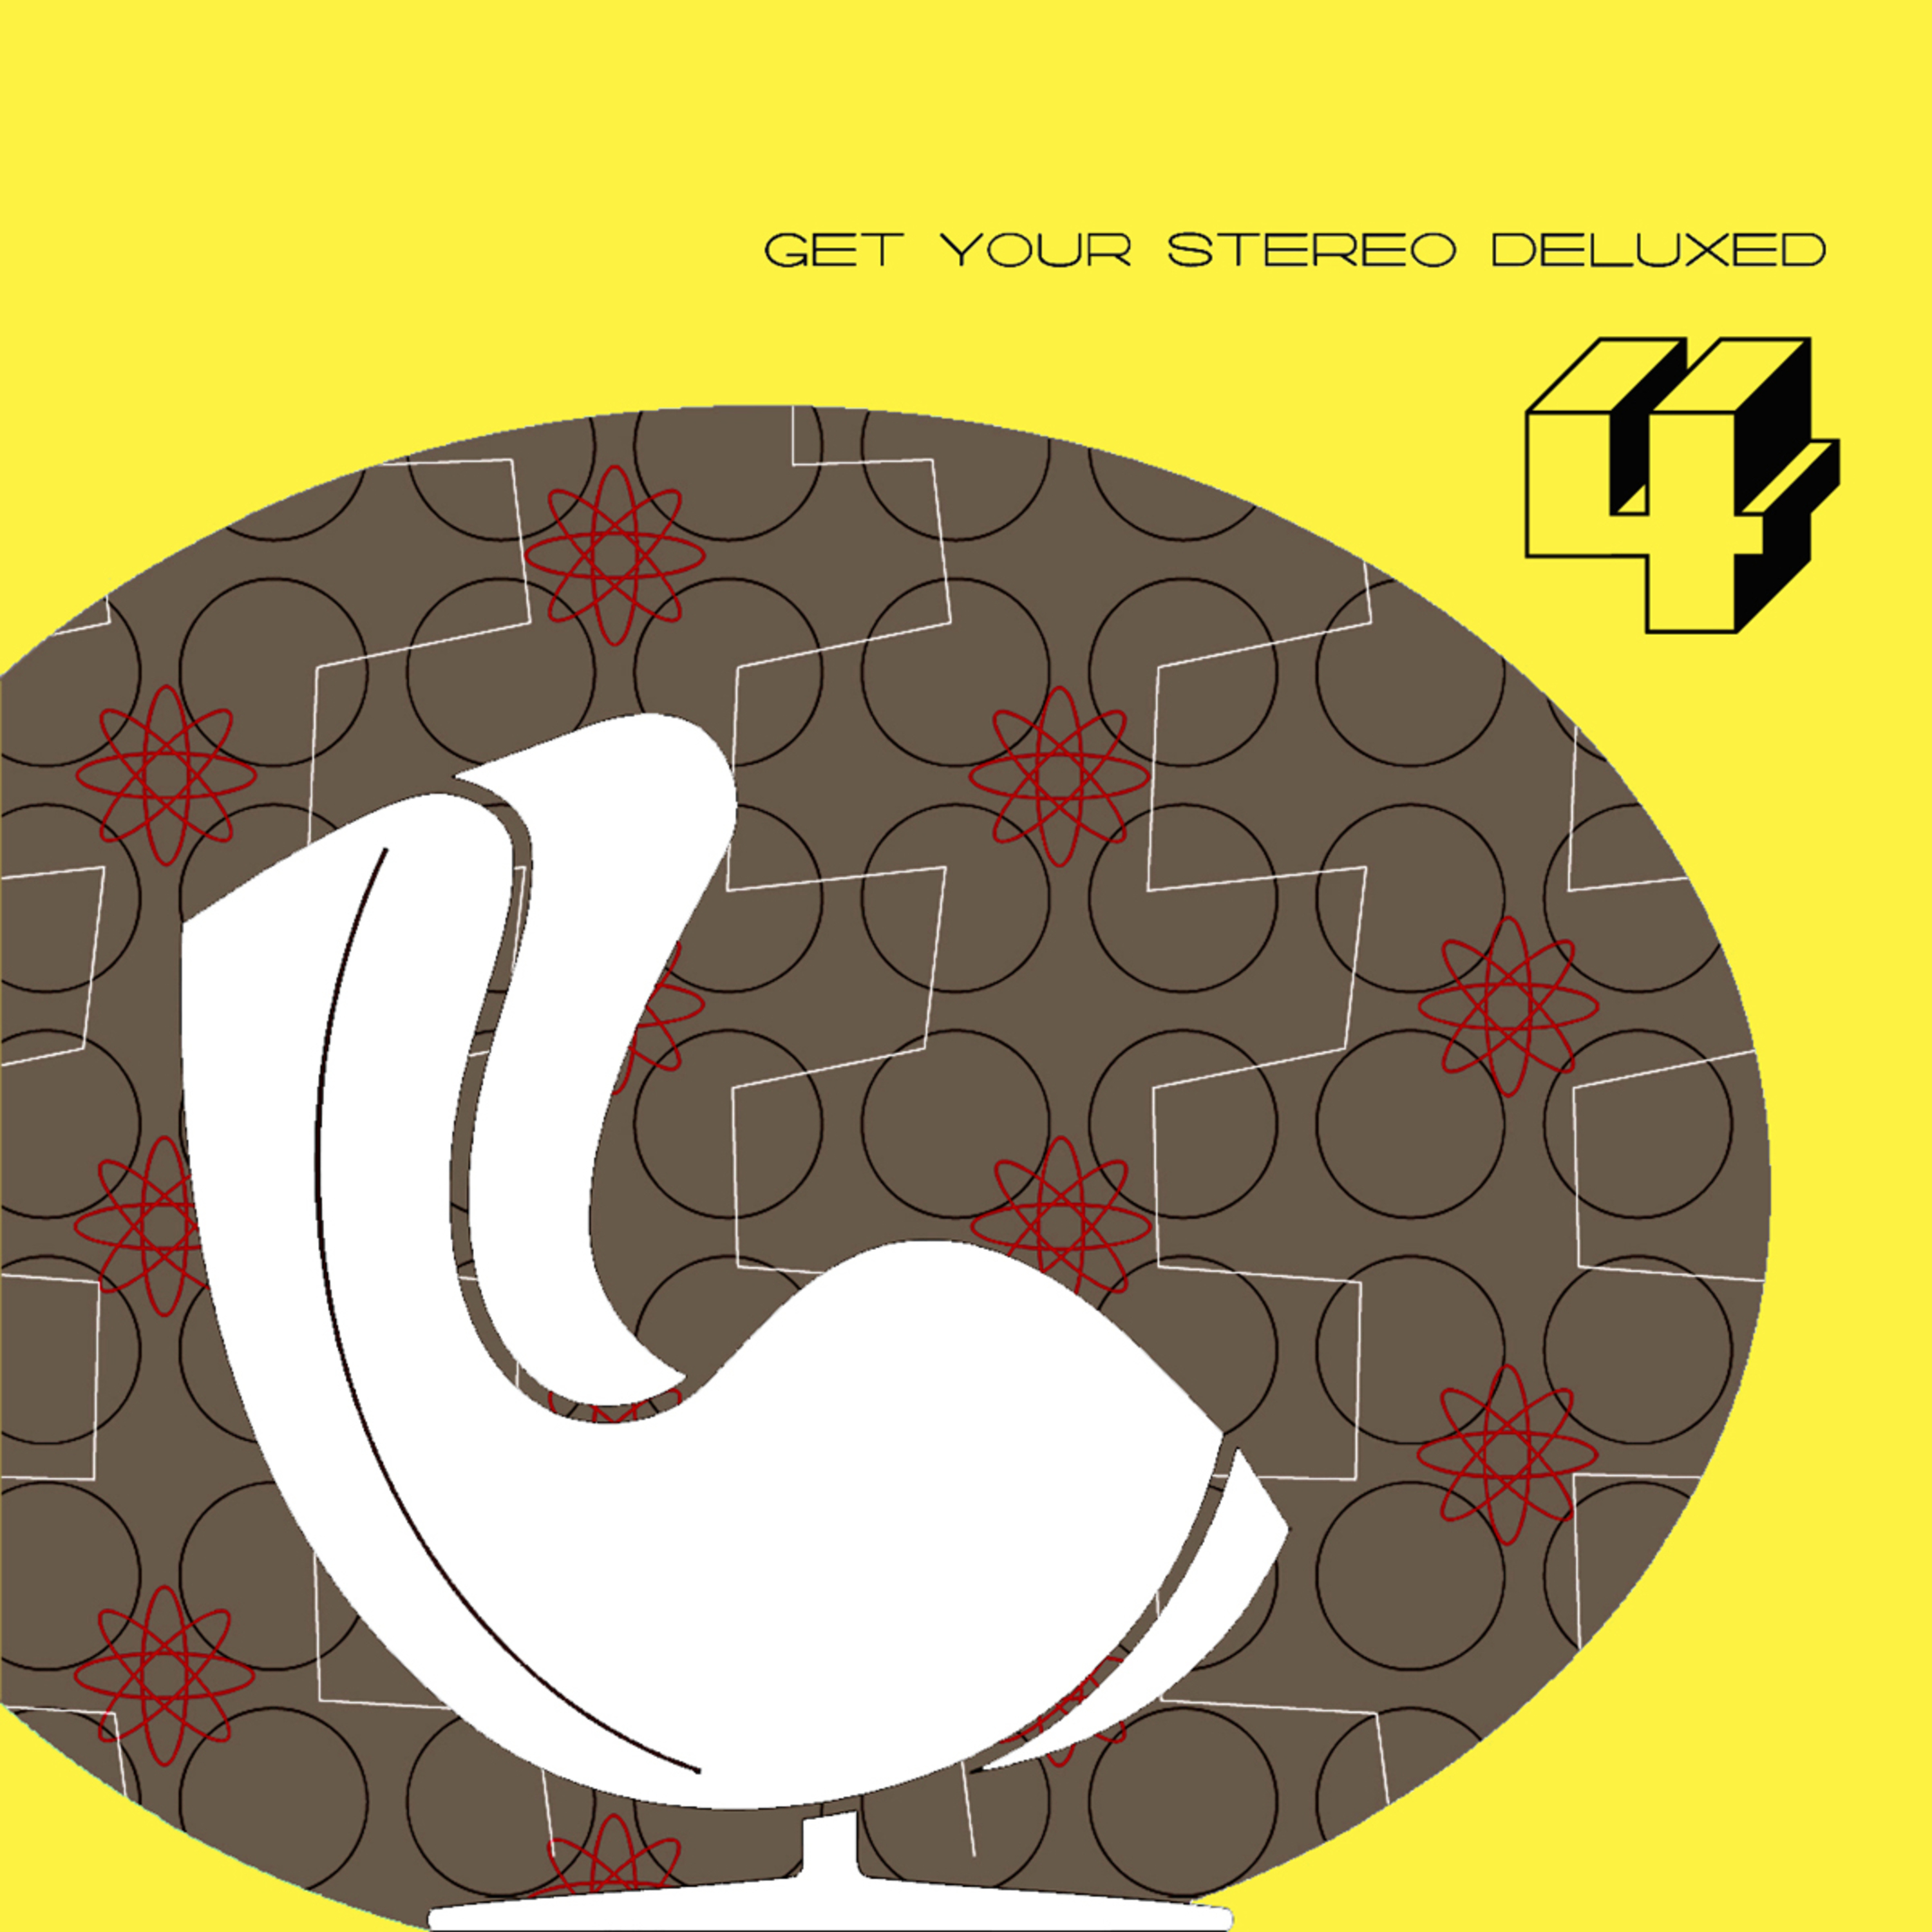 Get Your Stereo Deluxed (Vol. 4 compiled by DJ JONDAL & SHOW-B)